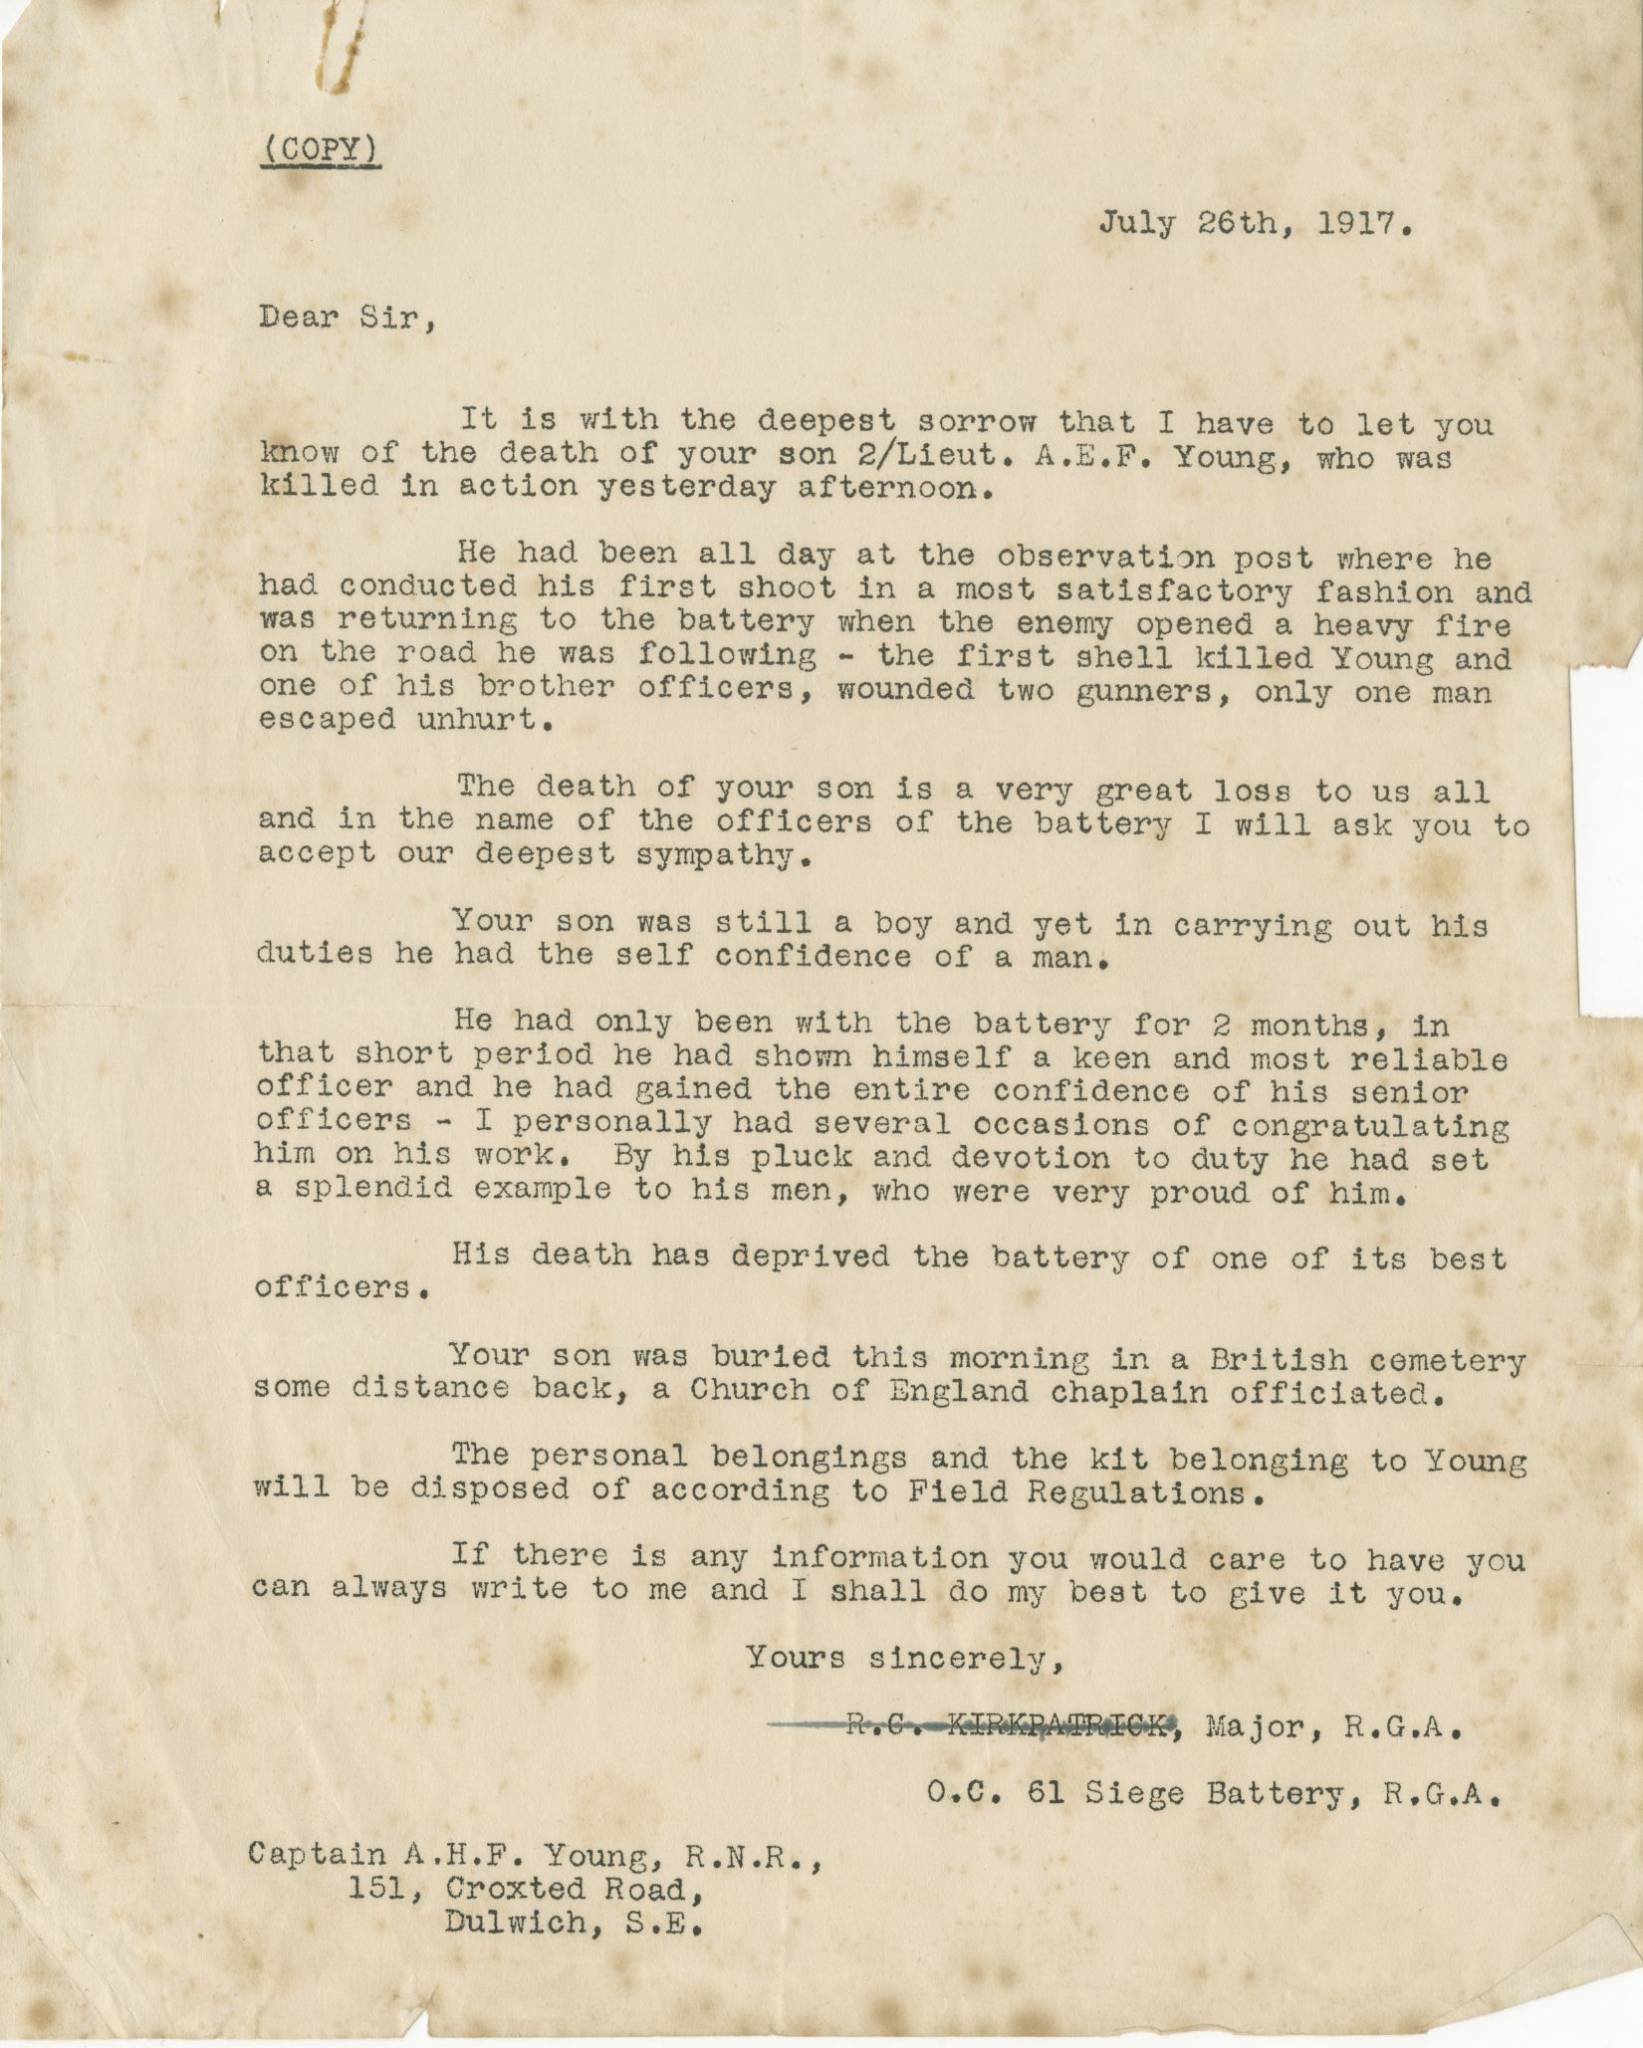 Young AEF Major Letter